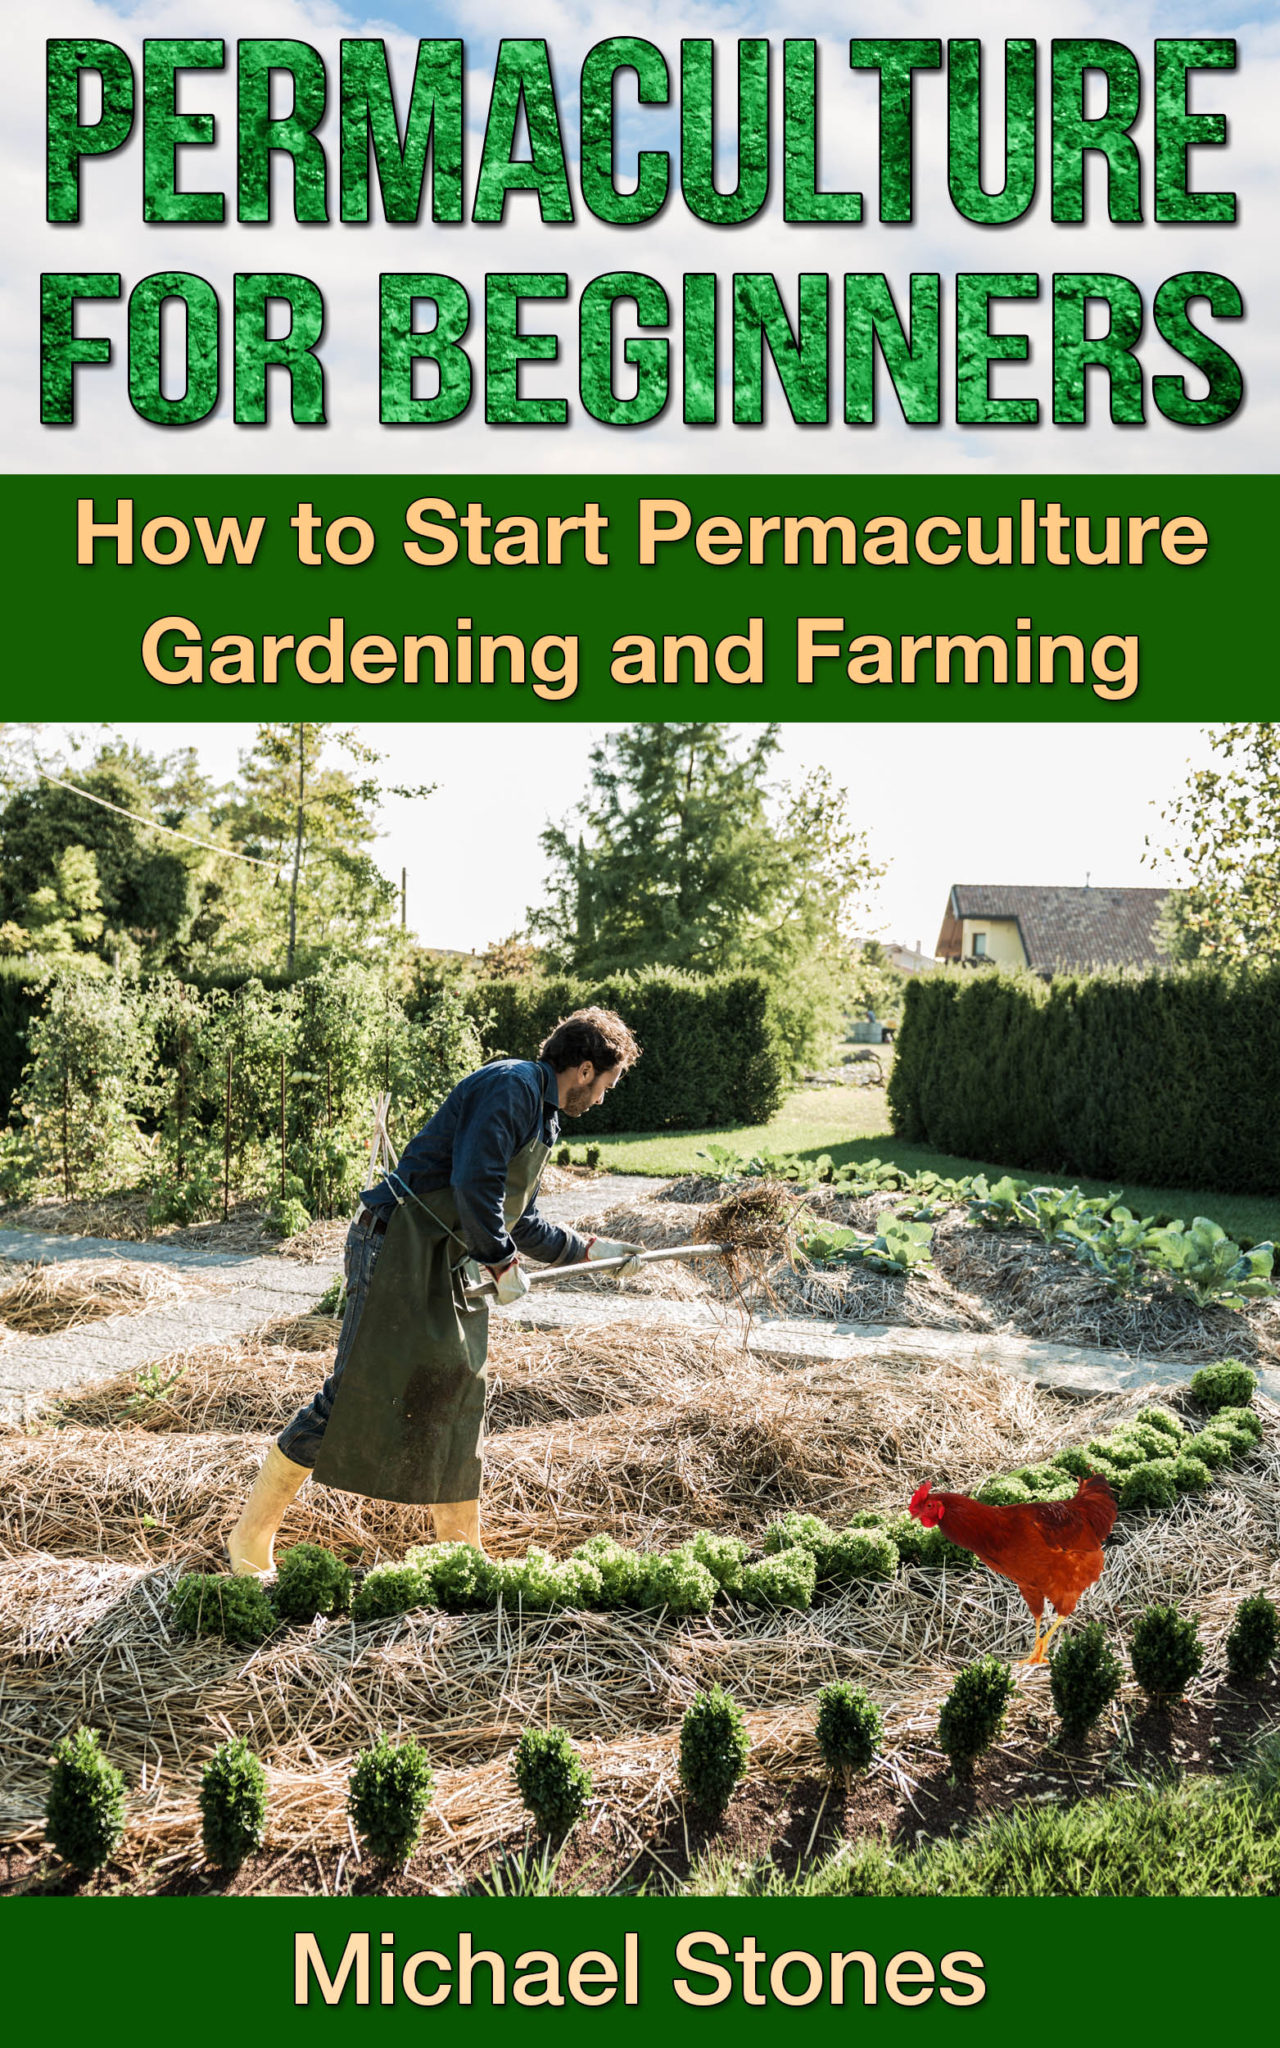 PERMACULTURE FOR BEGINNERS – How To Start Permaculture Gardening and Farming by Michael Stones